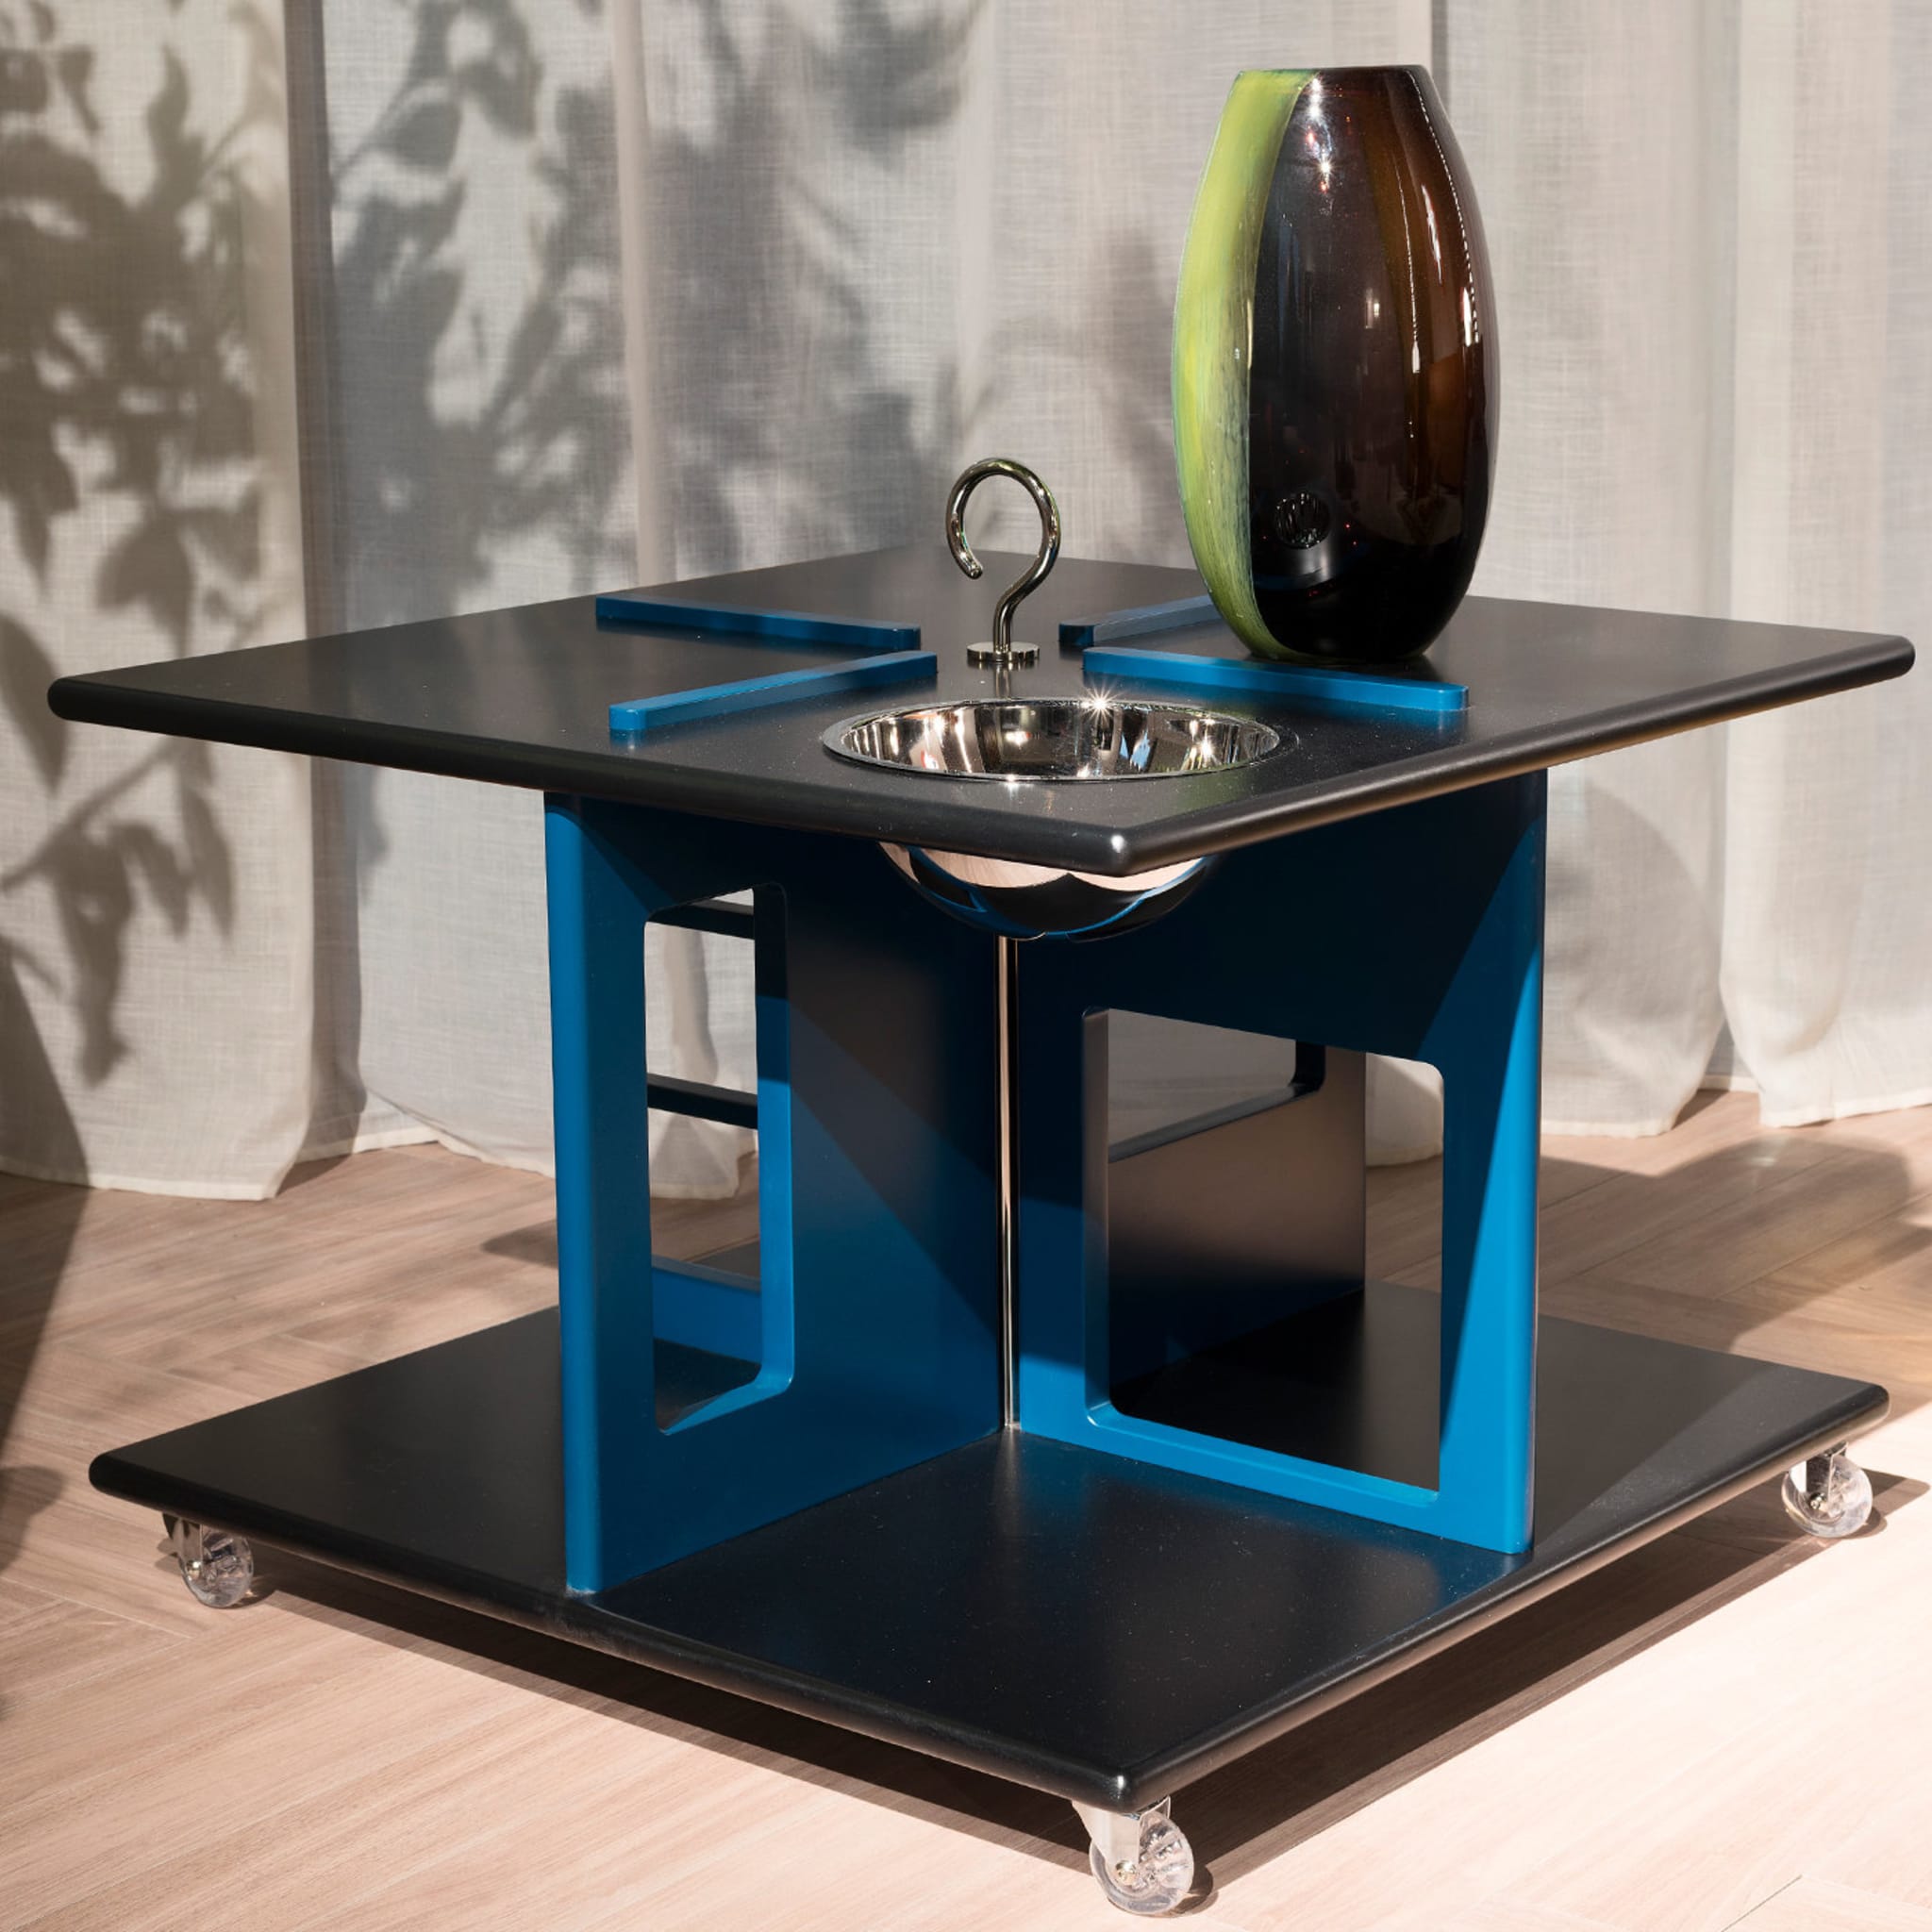 Dr. Za Black and Blue Service Table by CD&Z - Alternative view 1